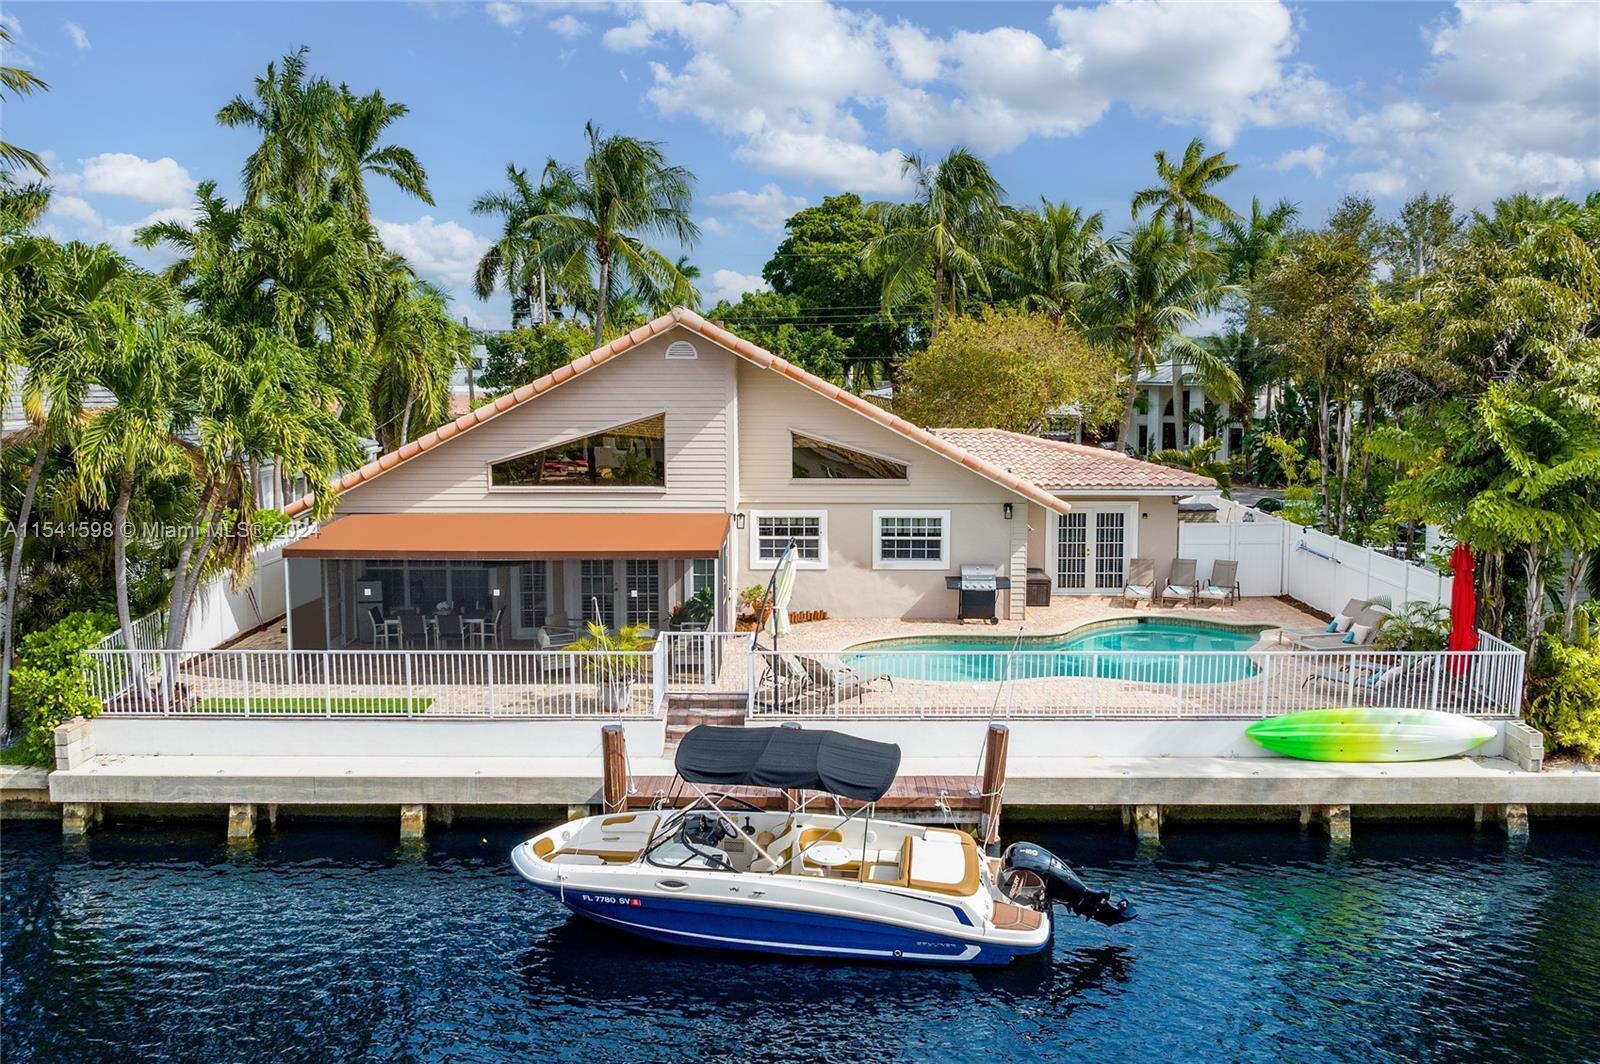 Welcome home to this spectacular waterfront home featuring 3 Bedrooms, 2 full bathrooms plus an offi